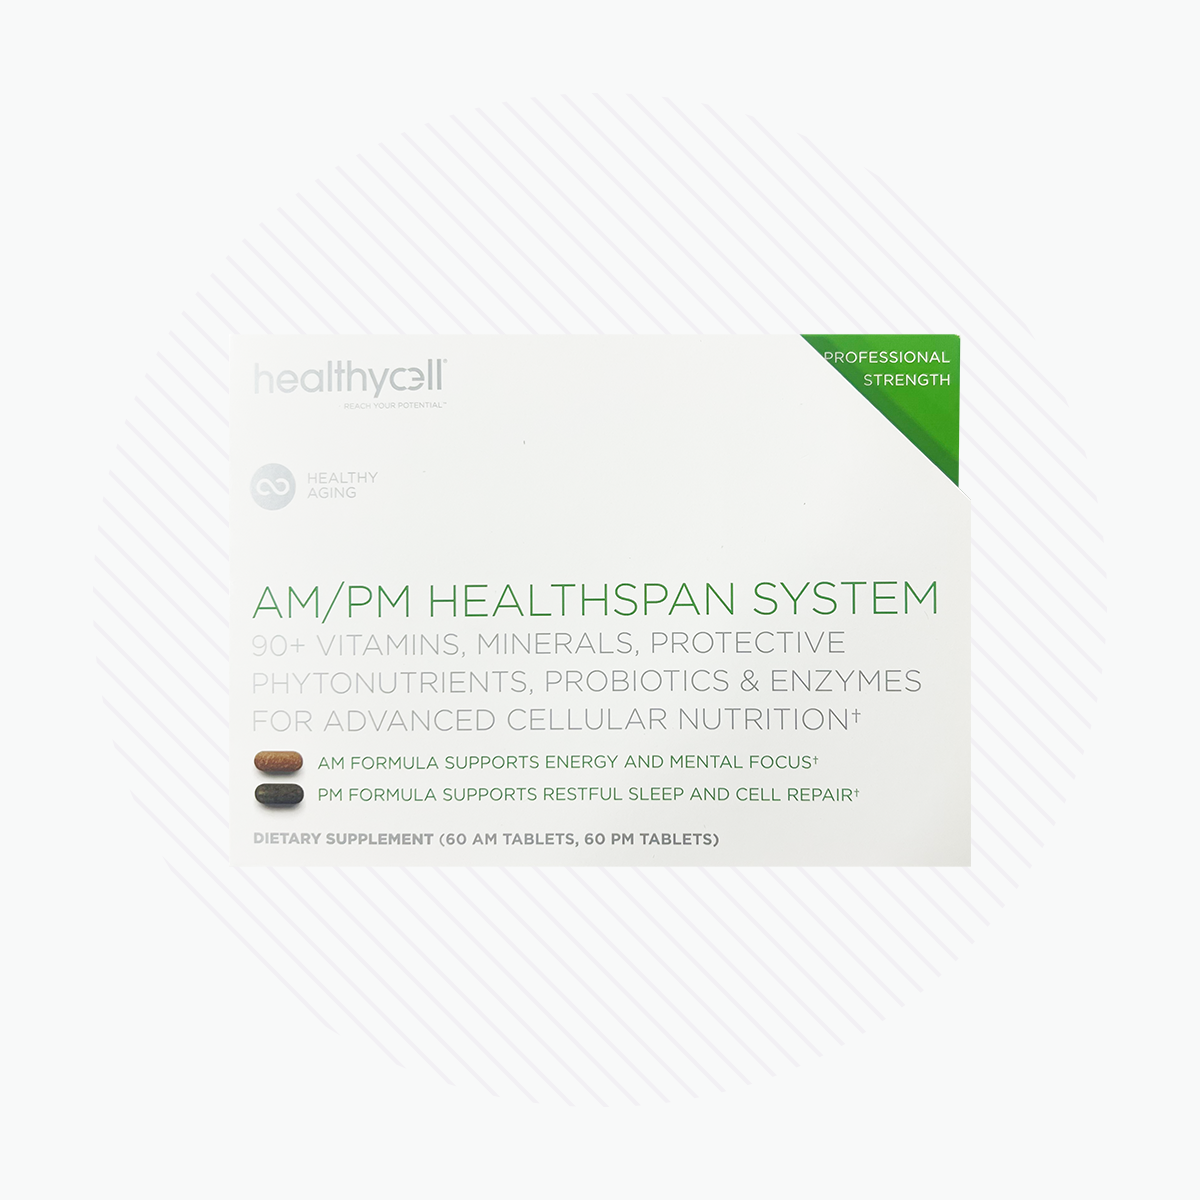 HealthyCell Multivitamin AM/PM Healthspan System (30 day Supply)